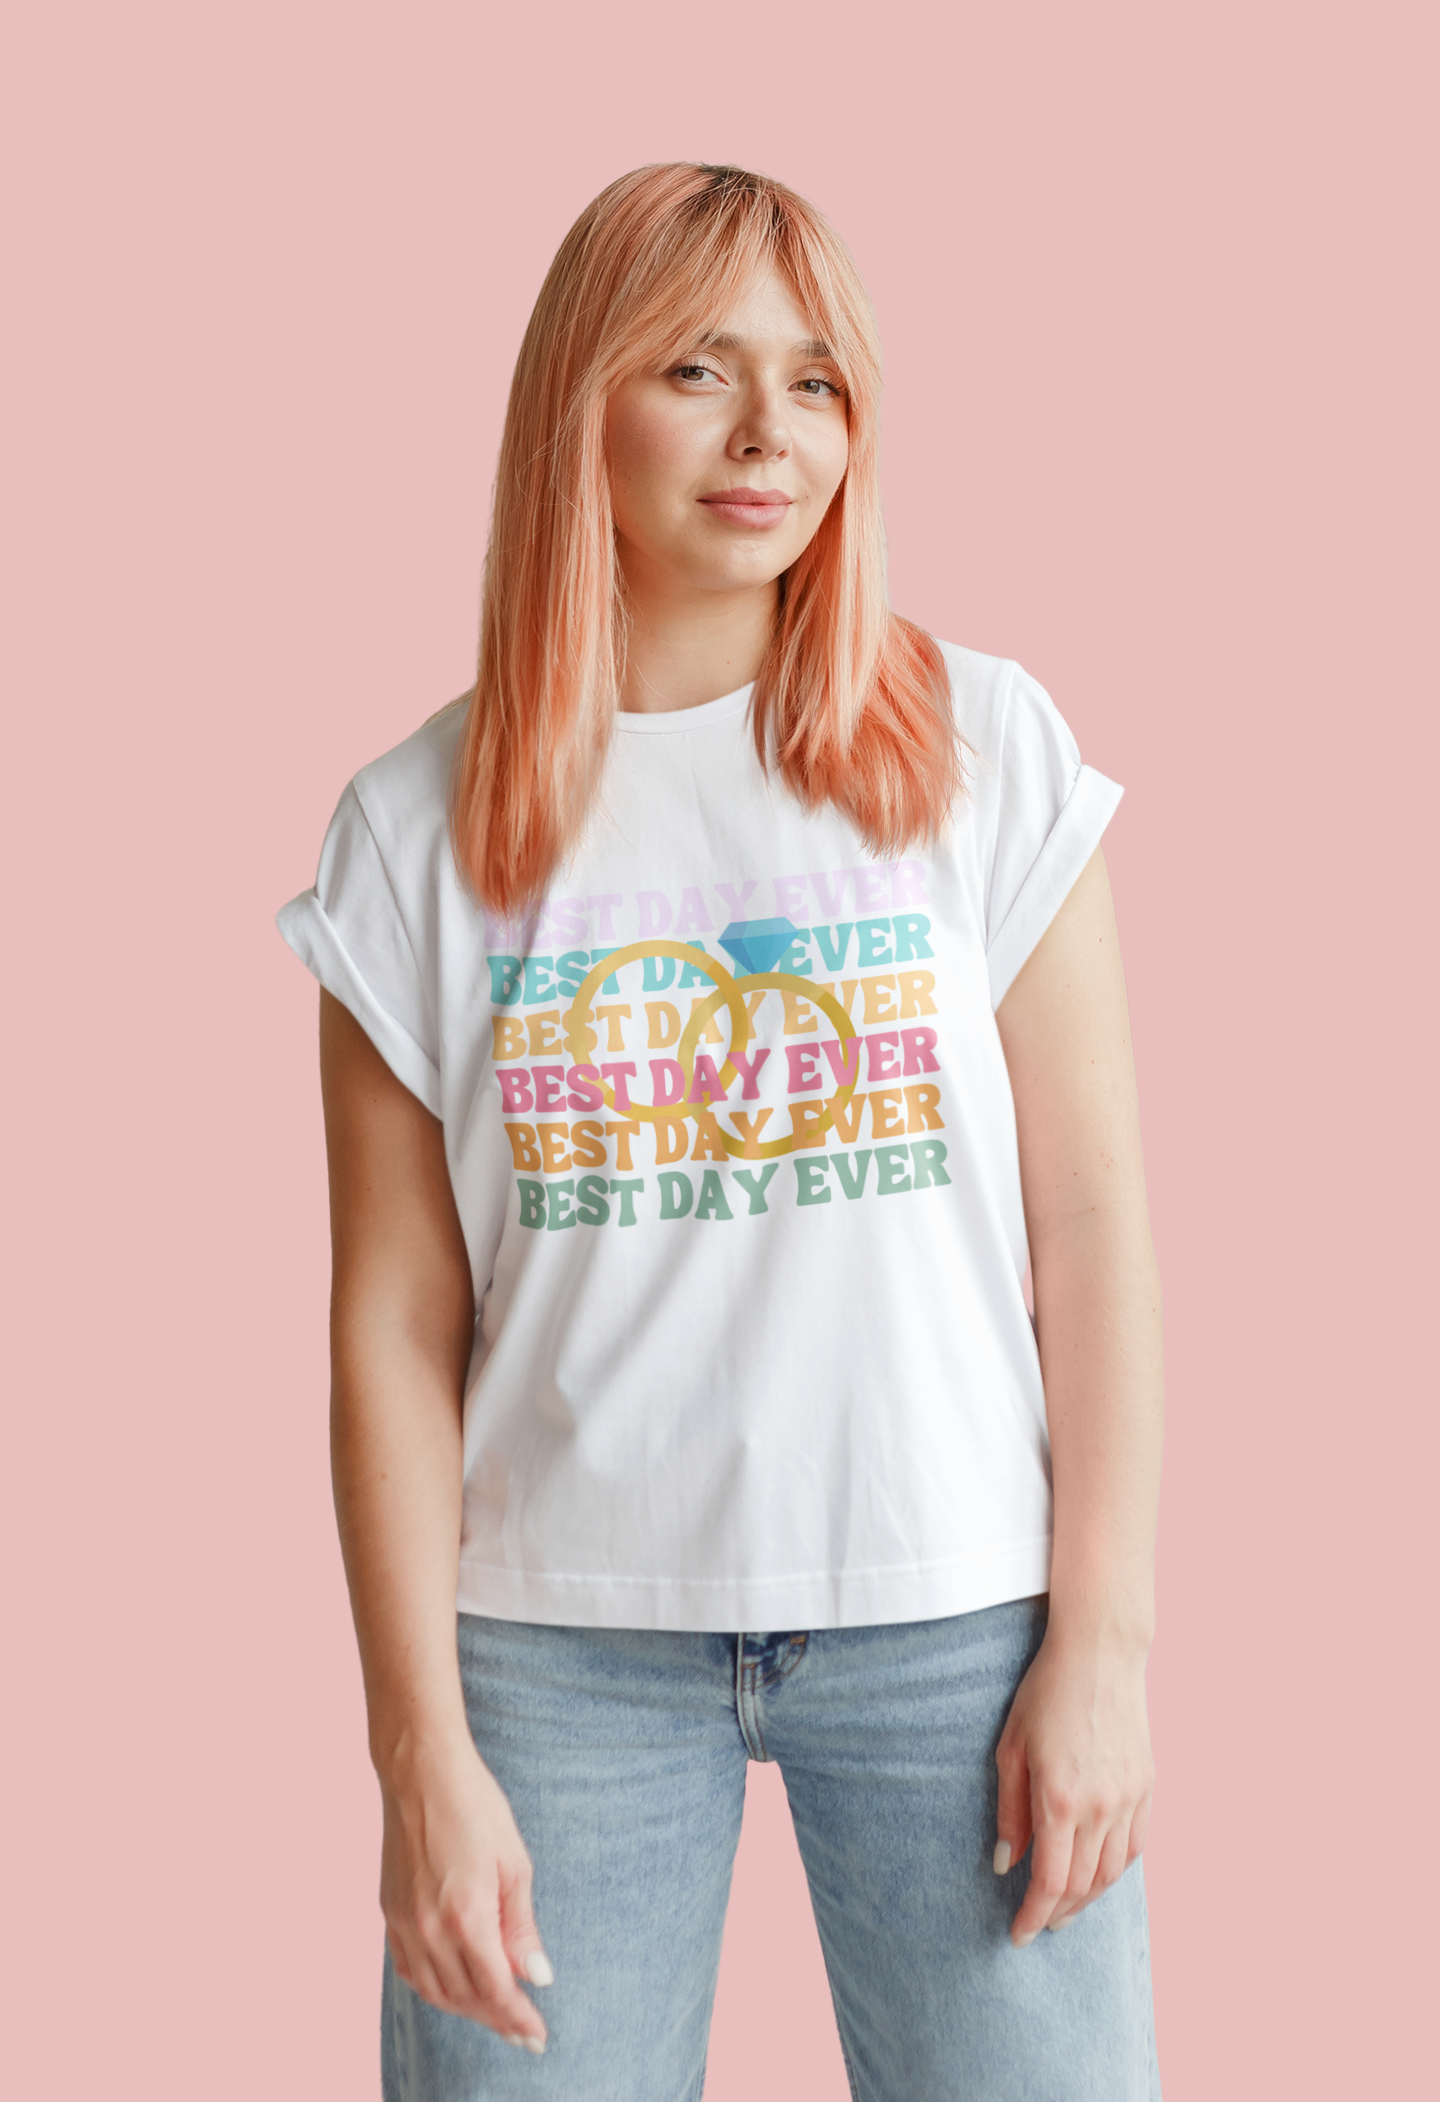 Best Day Ever Just Engaged Bride T Shirt - NKIN